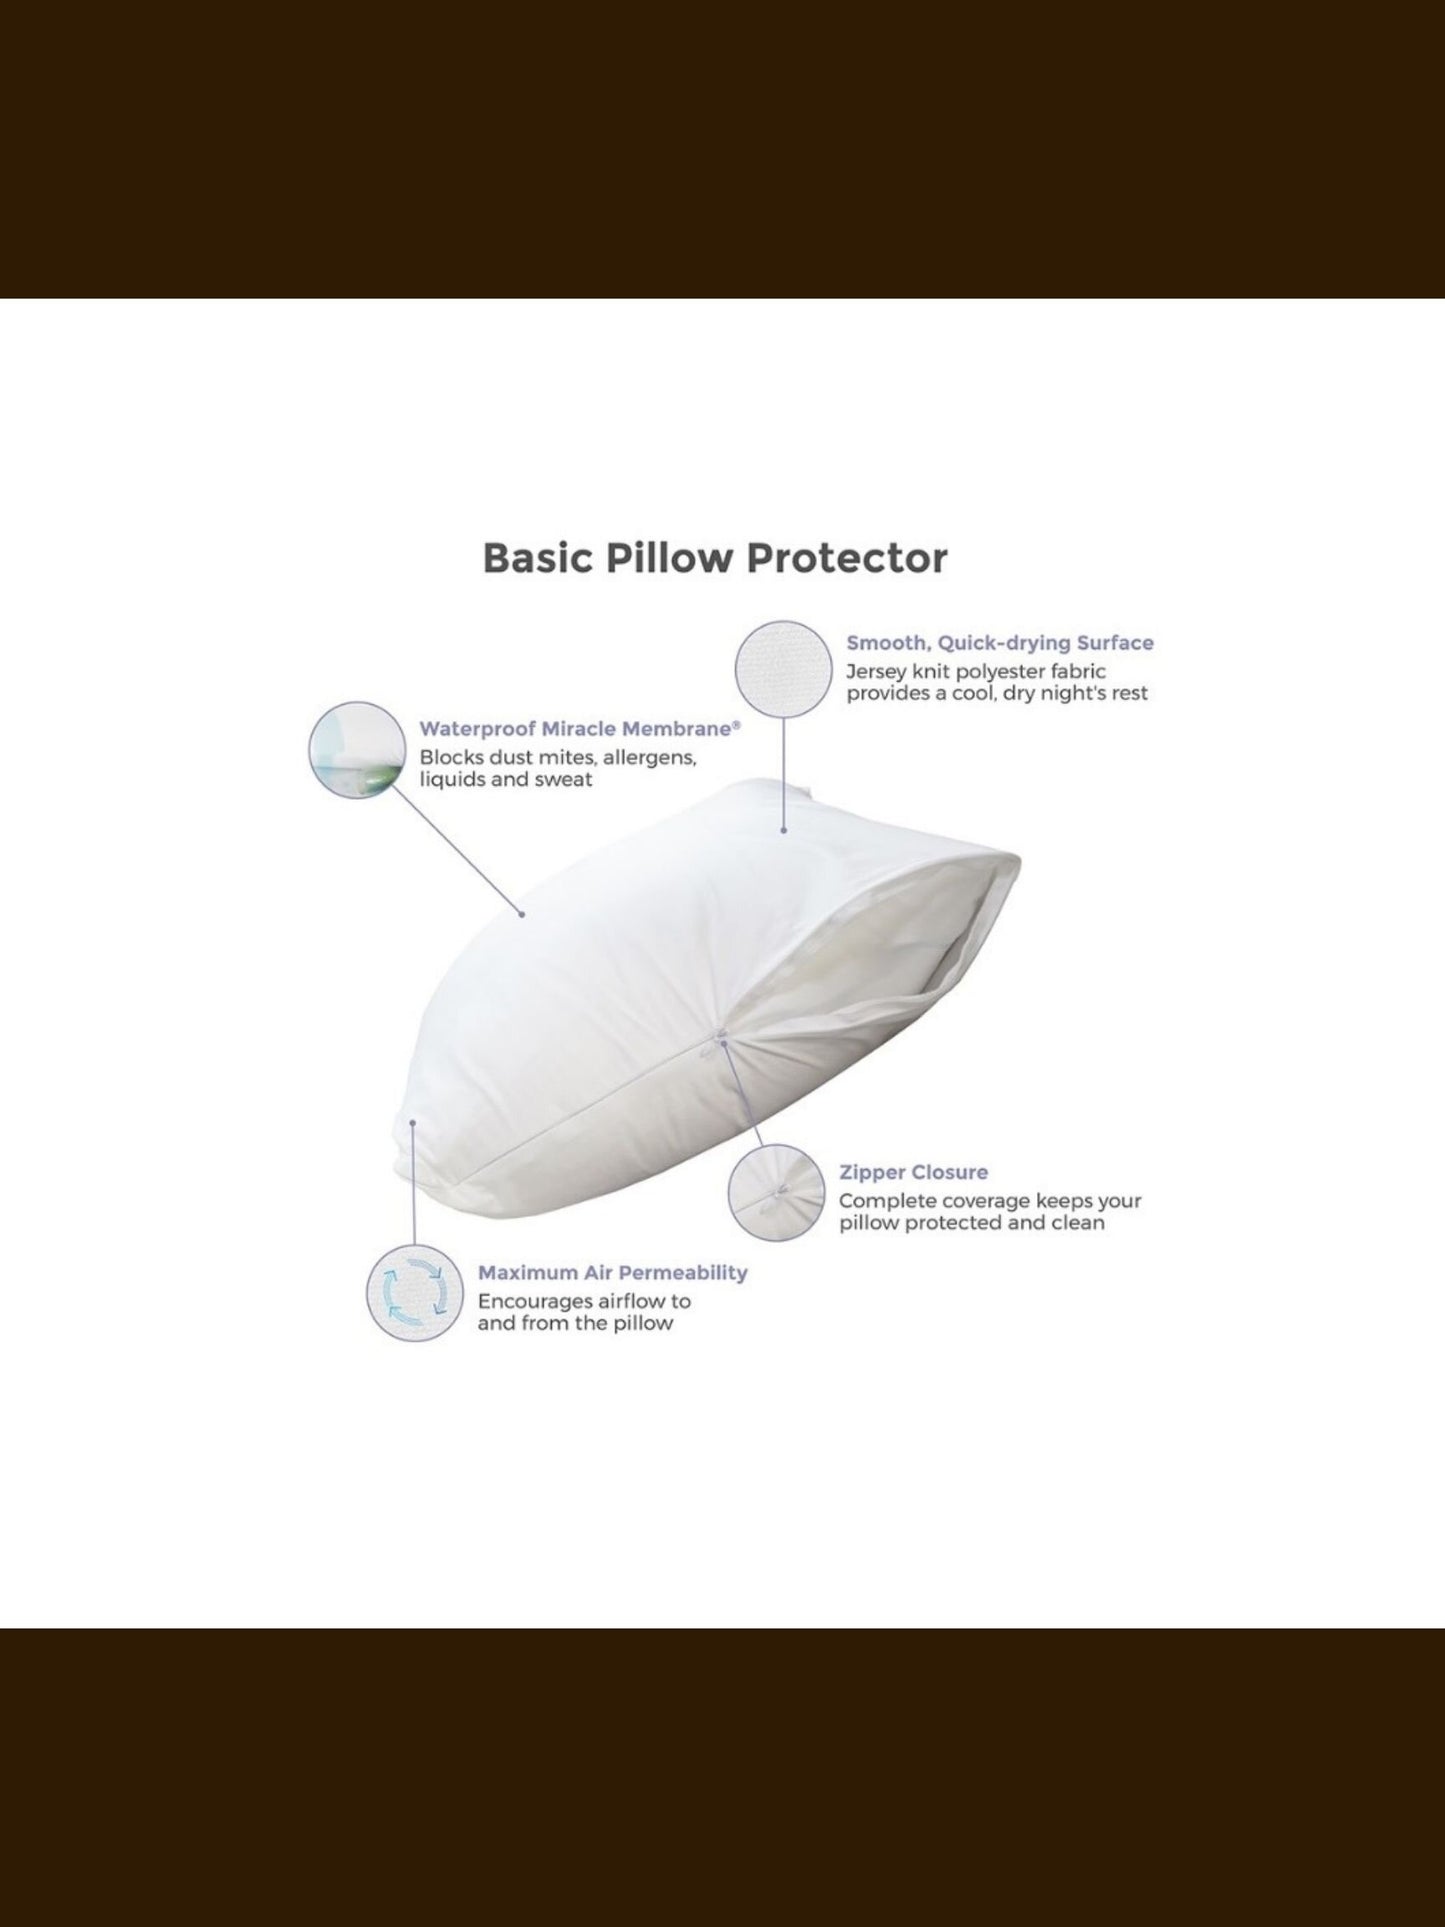 Basic Protection - Pillow Protector